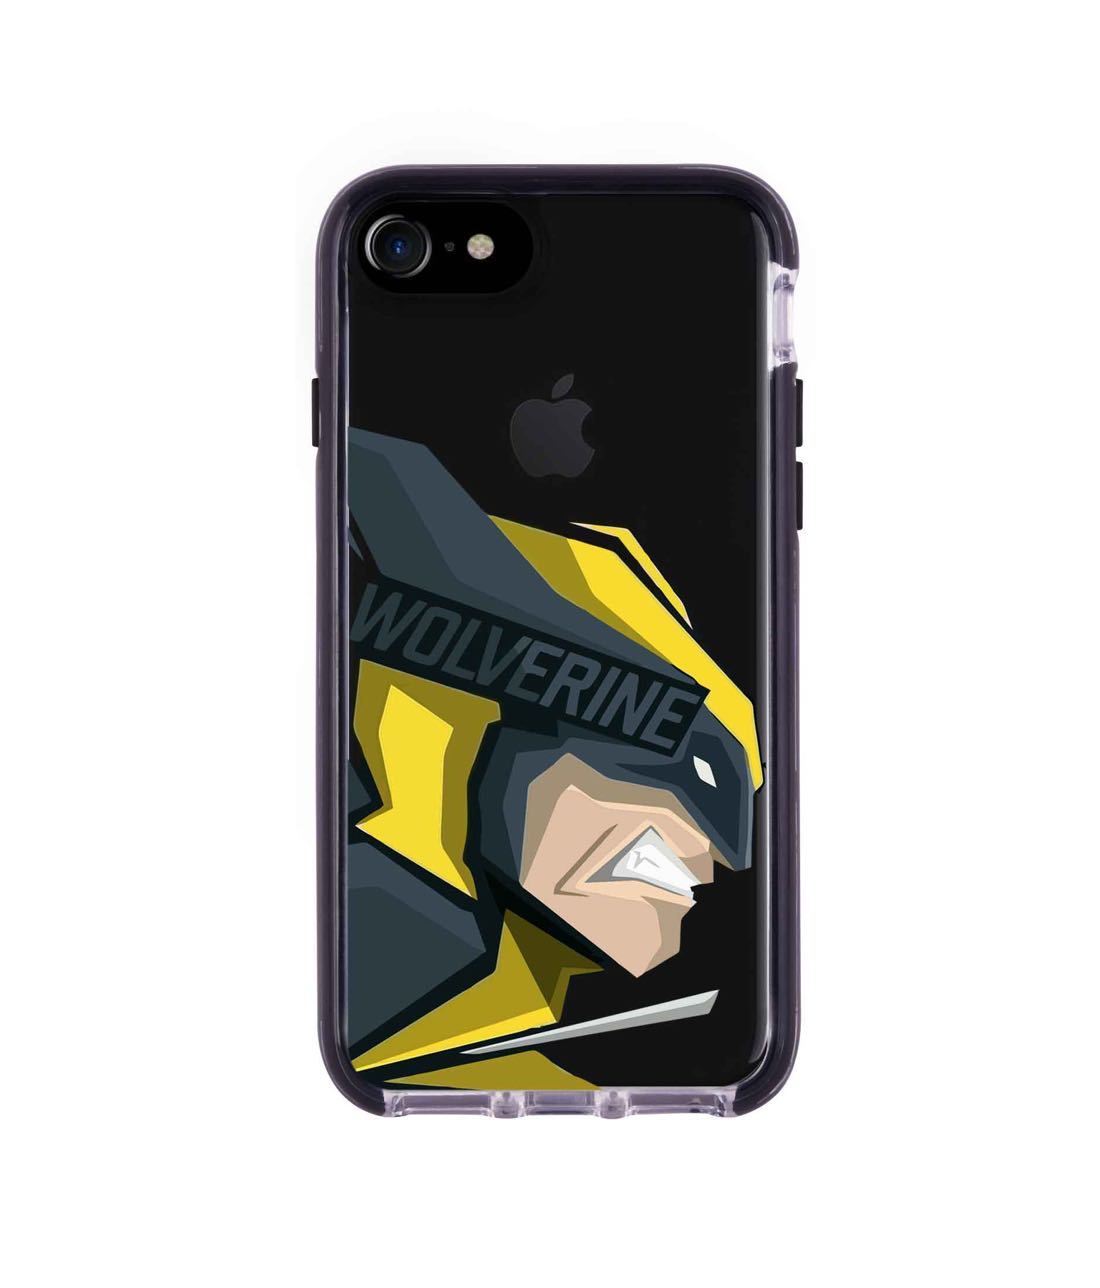 Dont Mess with Wolverine - Extreme Phone Case for iPhone 7